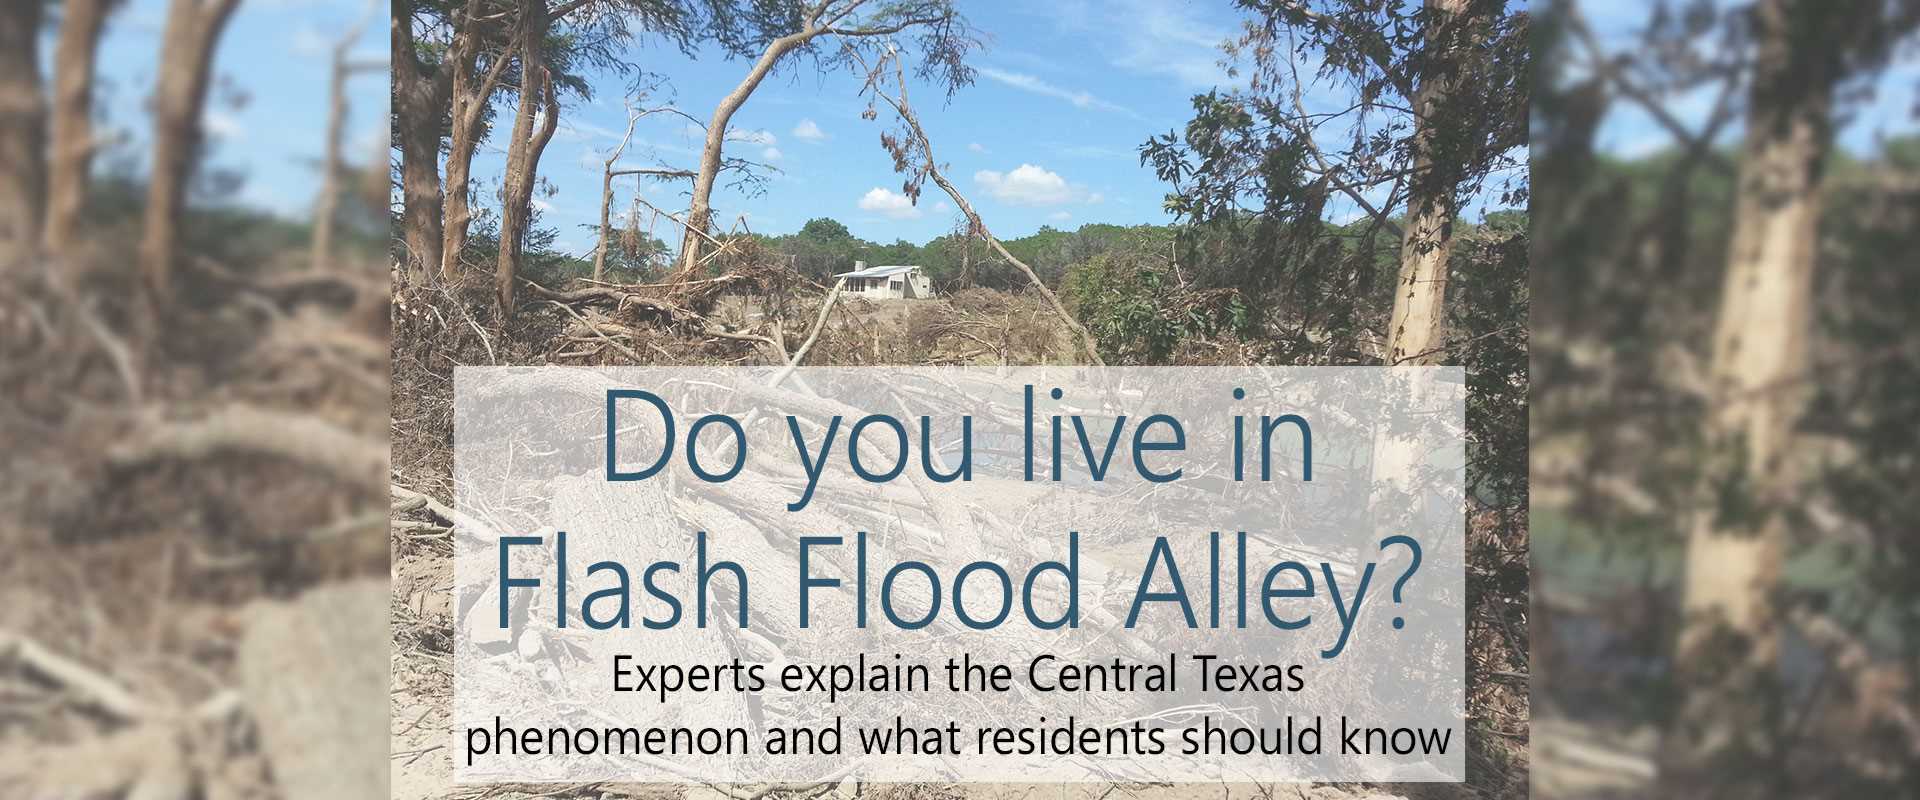 Do you live in Flash Flood Alley?